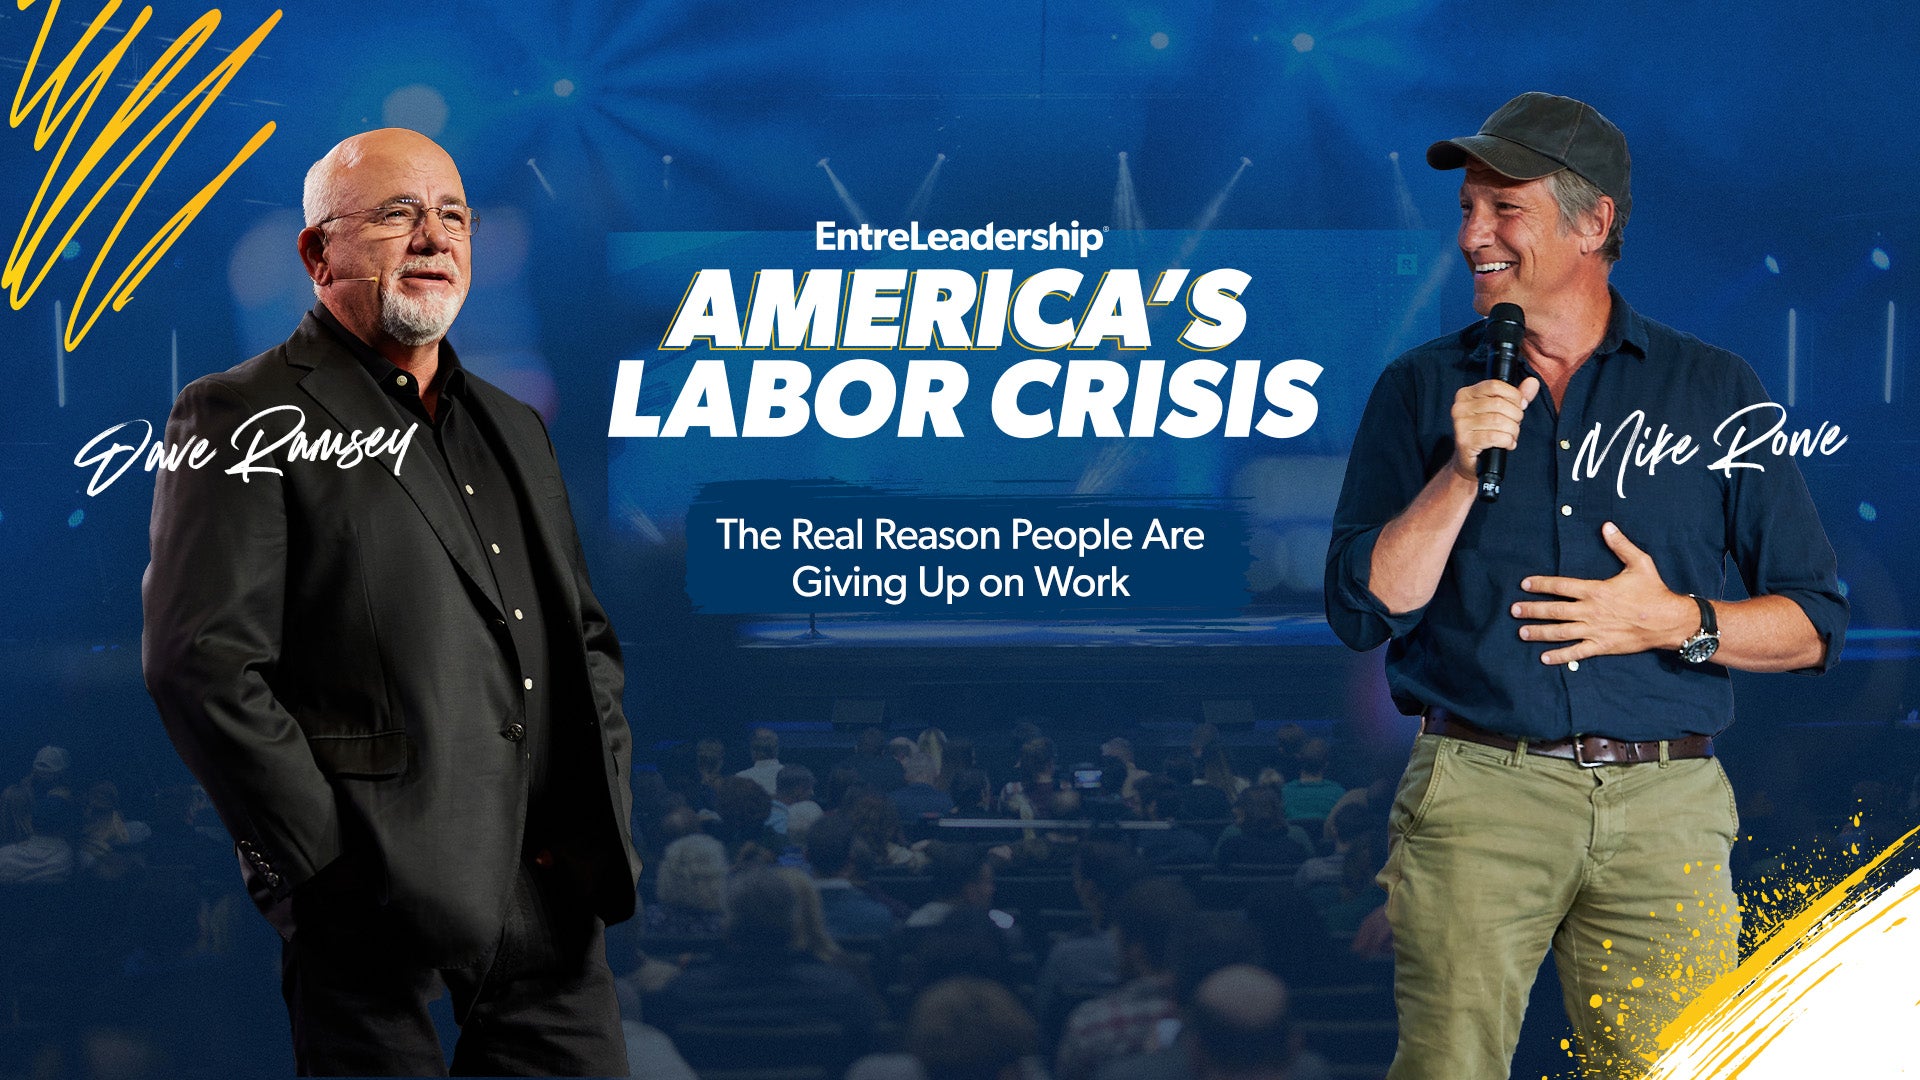 America's Labor Crisis with Dave Ramsey and Mike Rowe